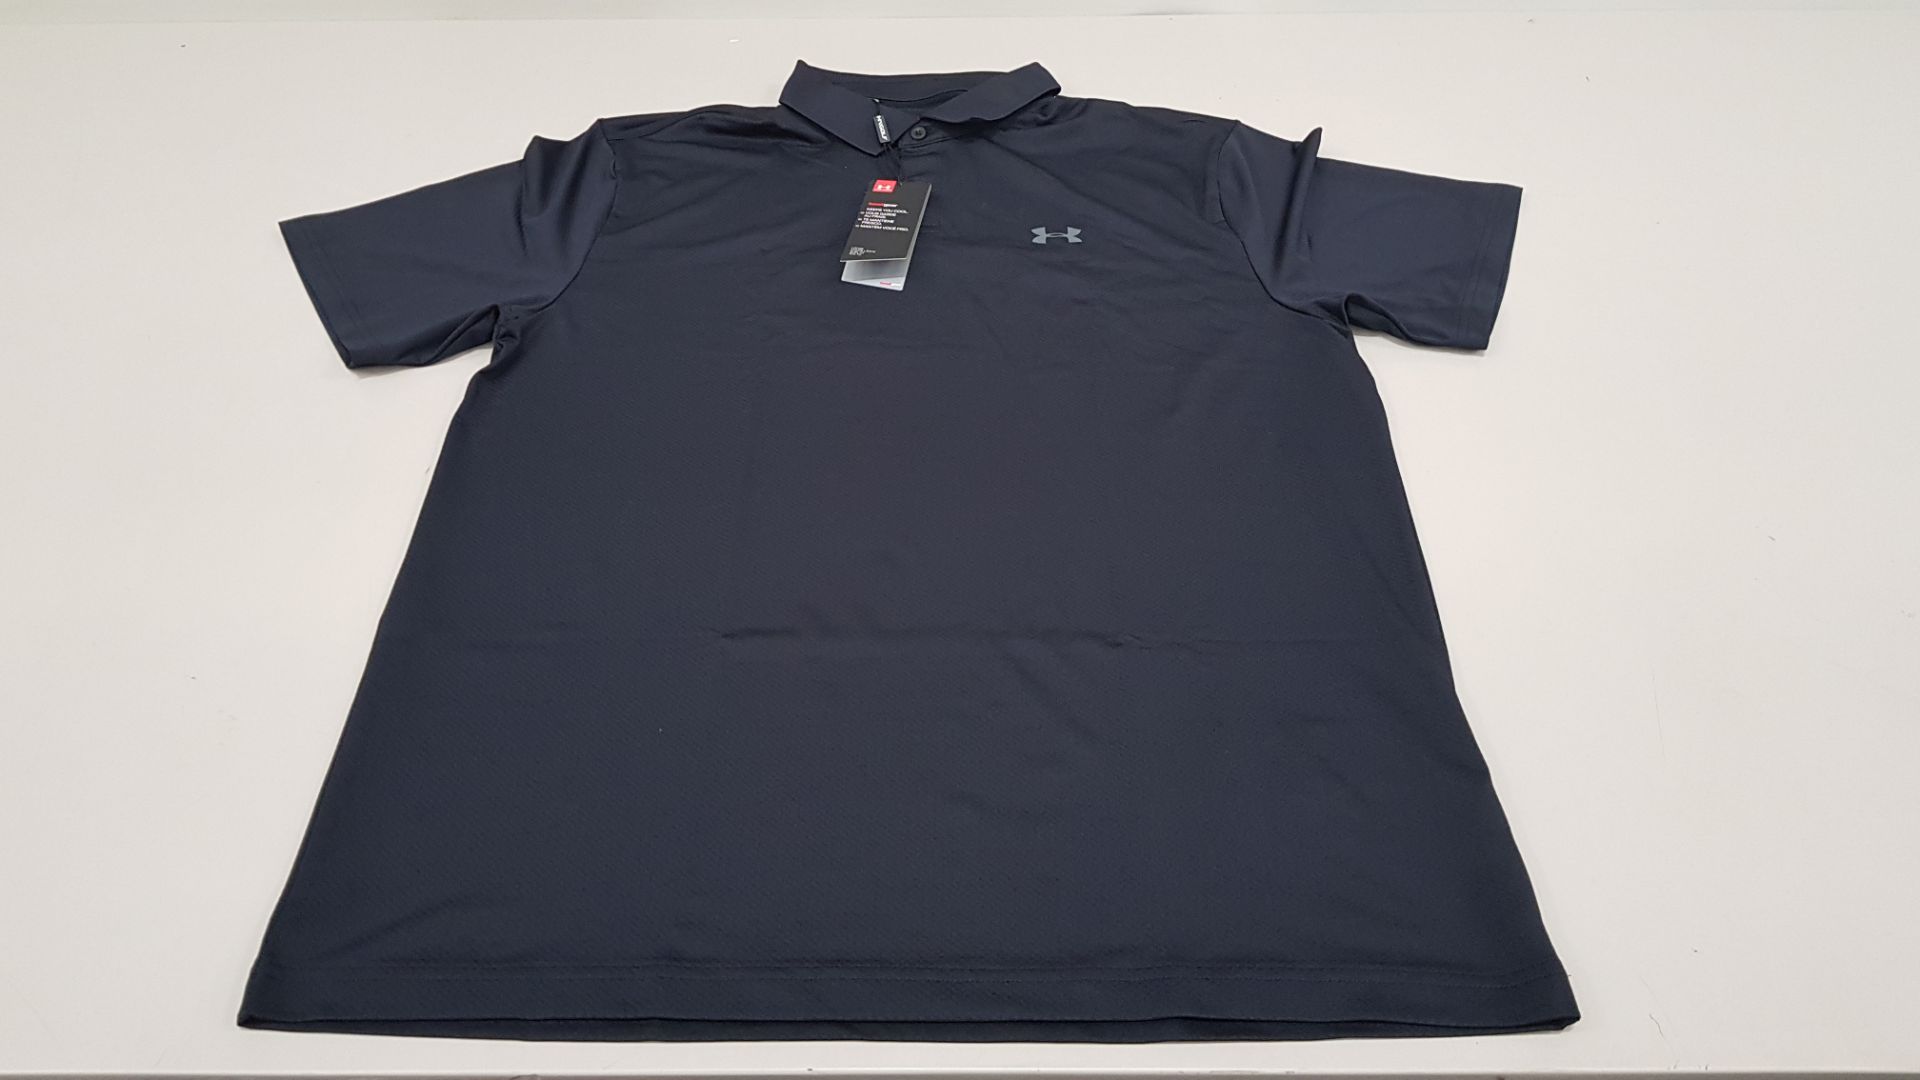 10 X BRAND NEW UNDER ARMOUR BLACK PERFORMANCE POLO SHIRTS SIZE LARGE RRP £34.99 (TOTAL RRP £349.99)